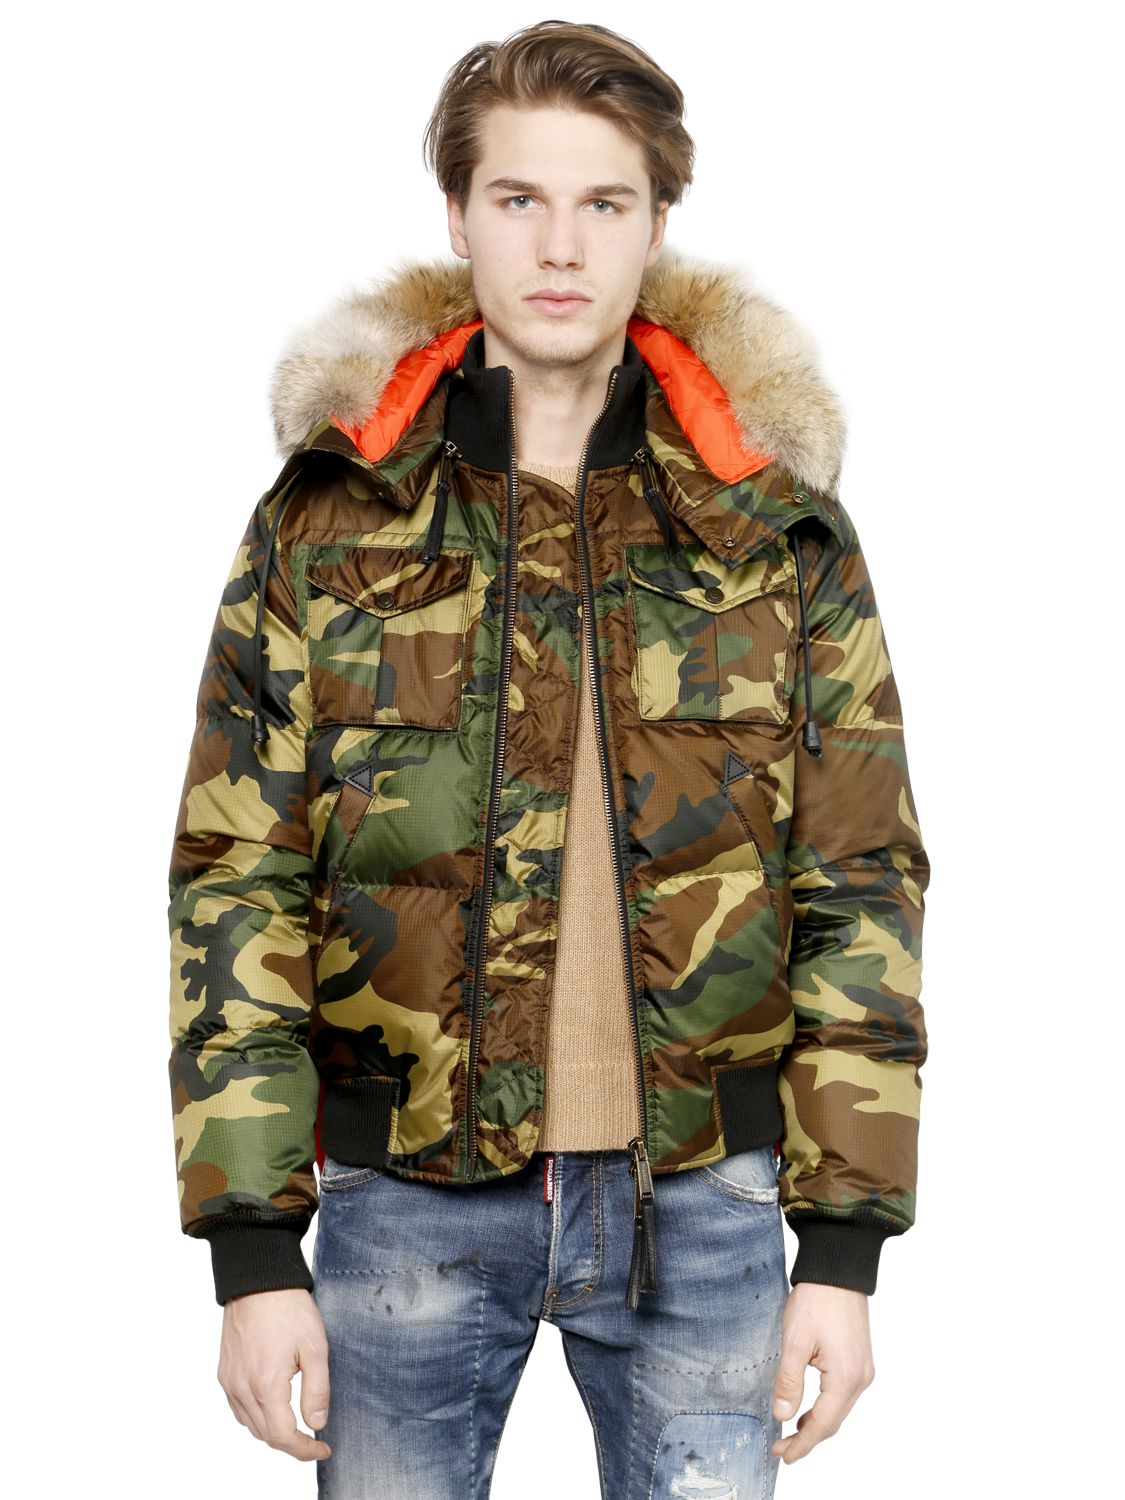 Lyst - Dsquared² Camouflage Hooded Nylon Down Jacket in Green for Men